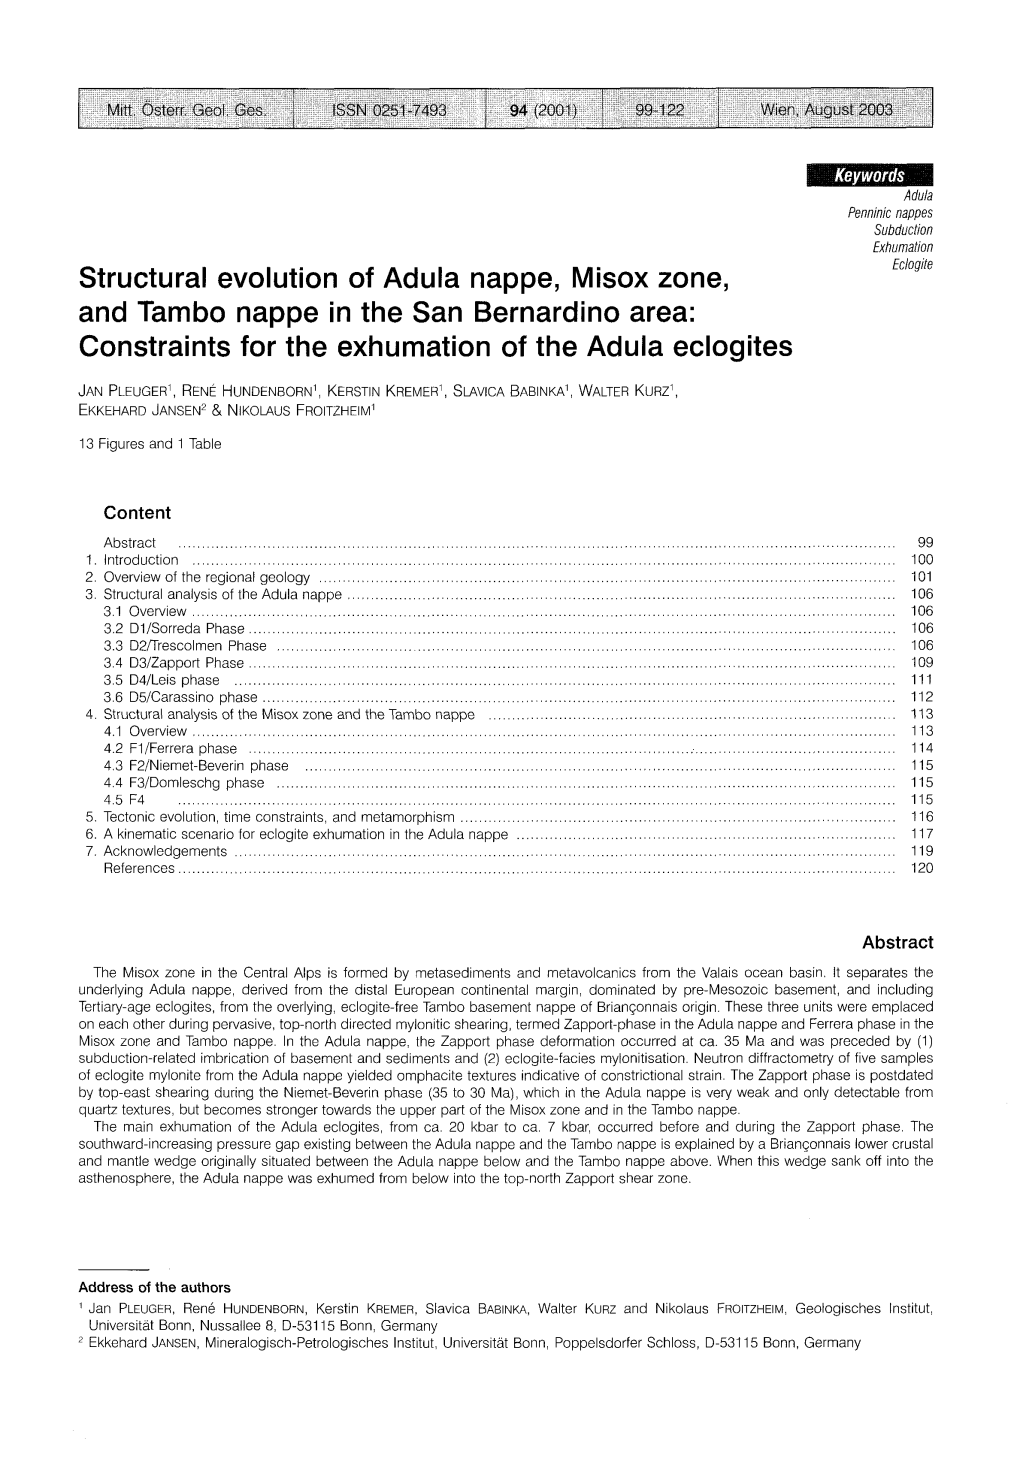 Structural Evolution of Adula Nappe, Misox Zone, and Tambo Nappe in the San Bernardino Area: Constraints for the Exhumation of the Adula Eclogites